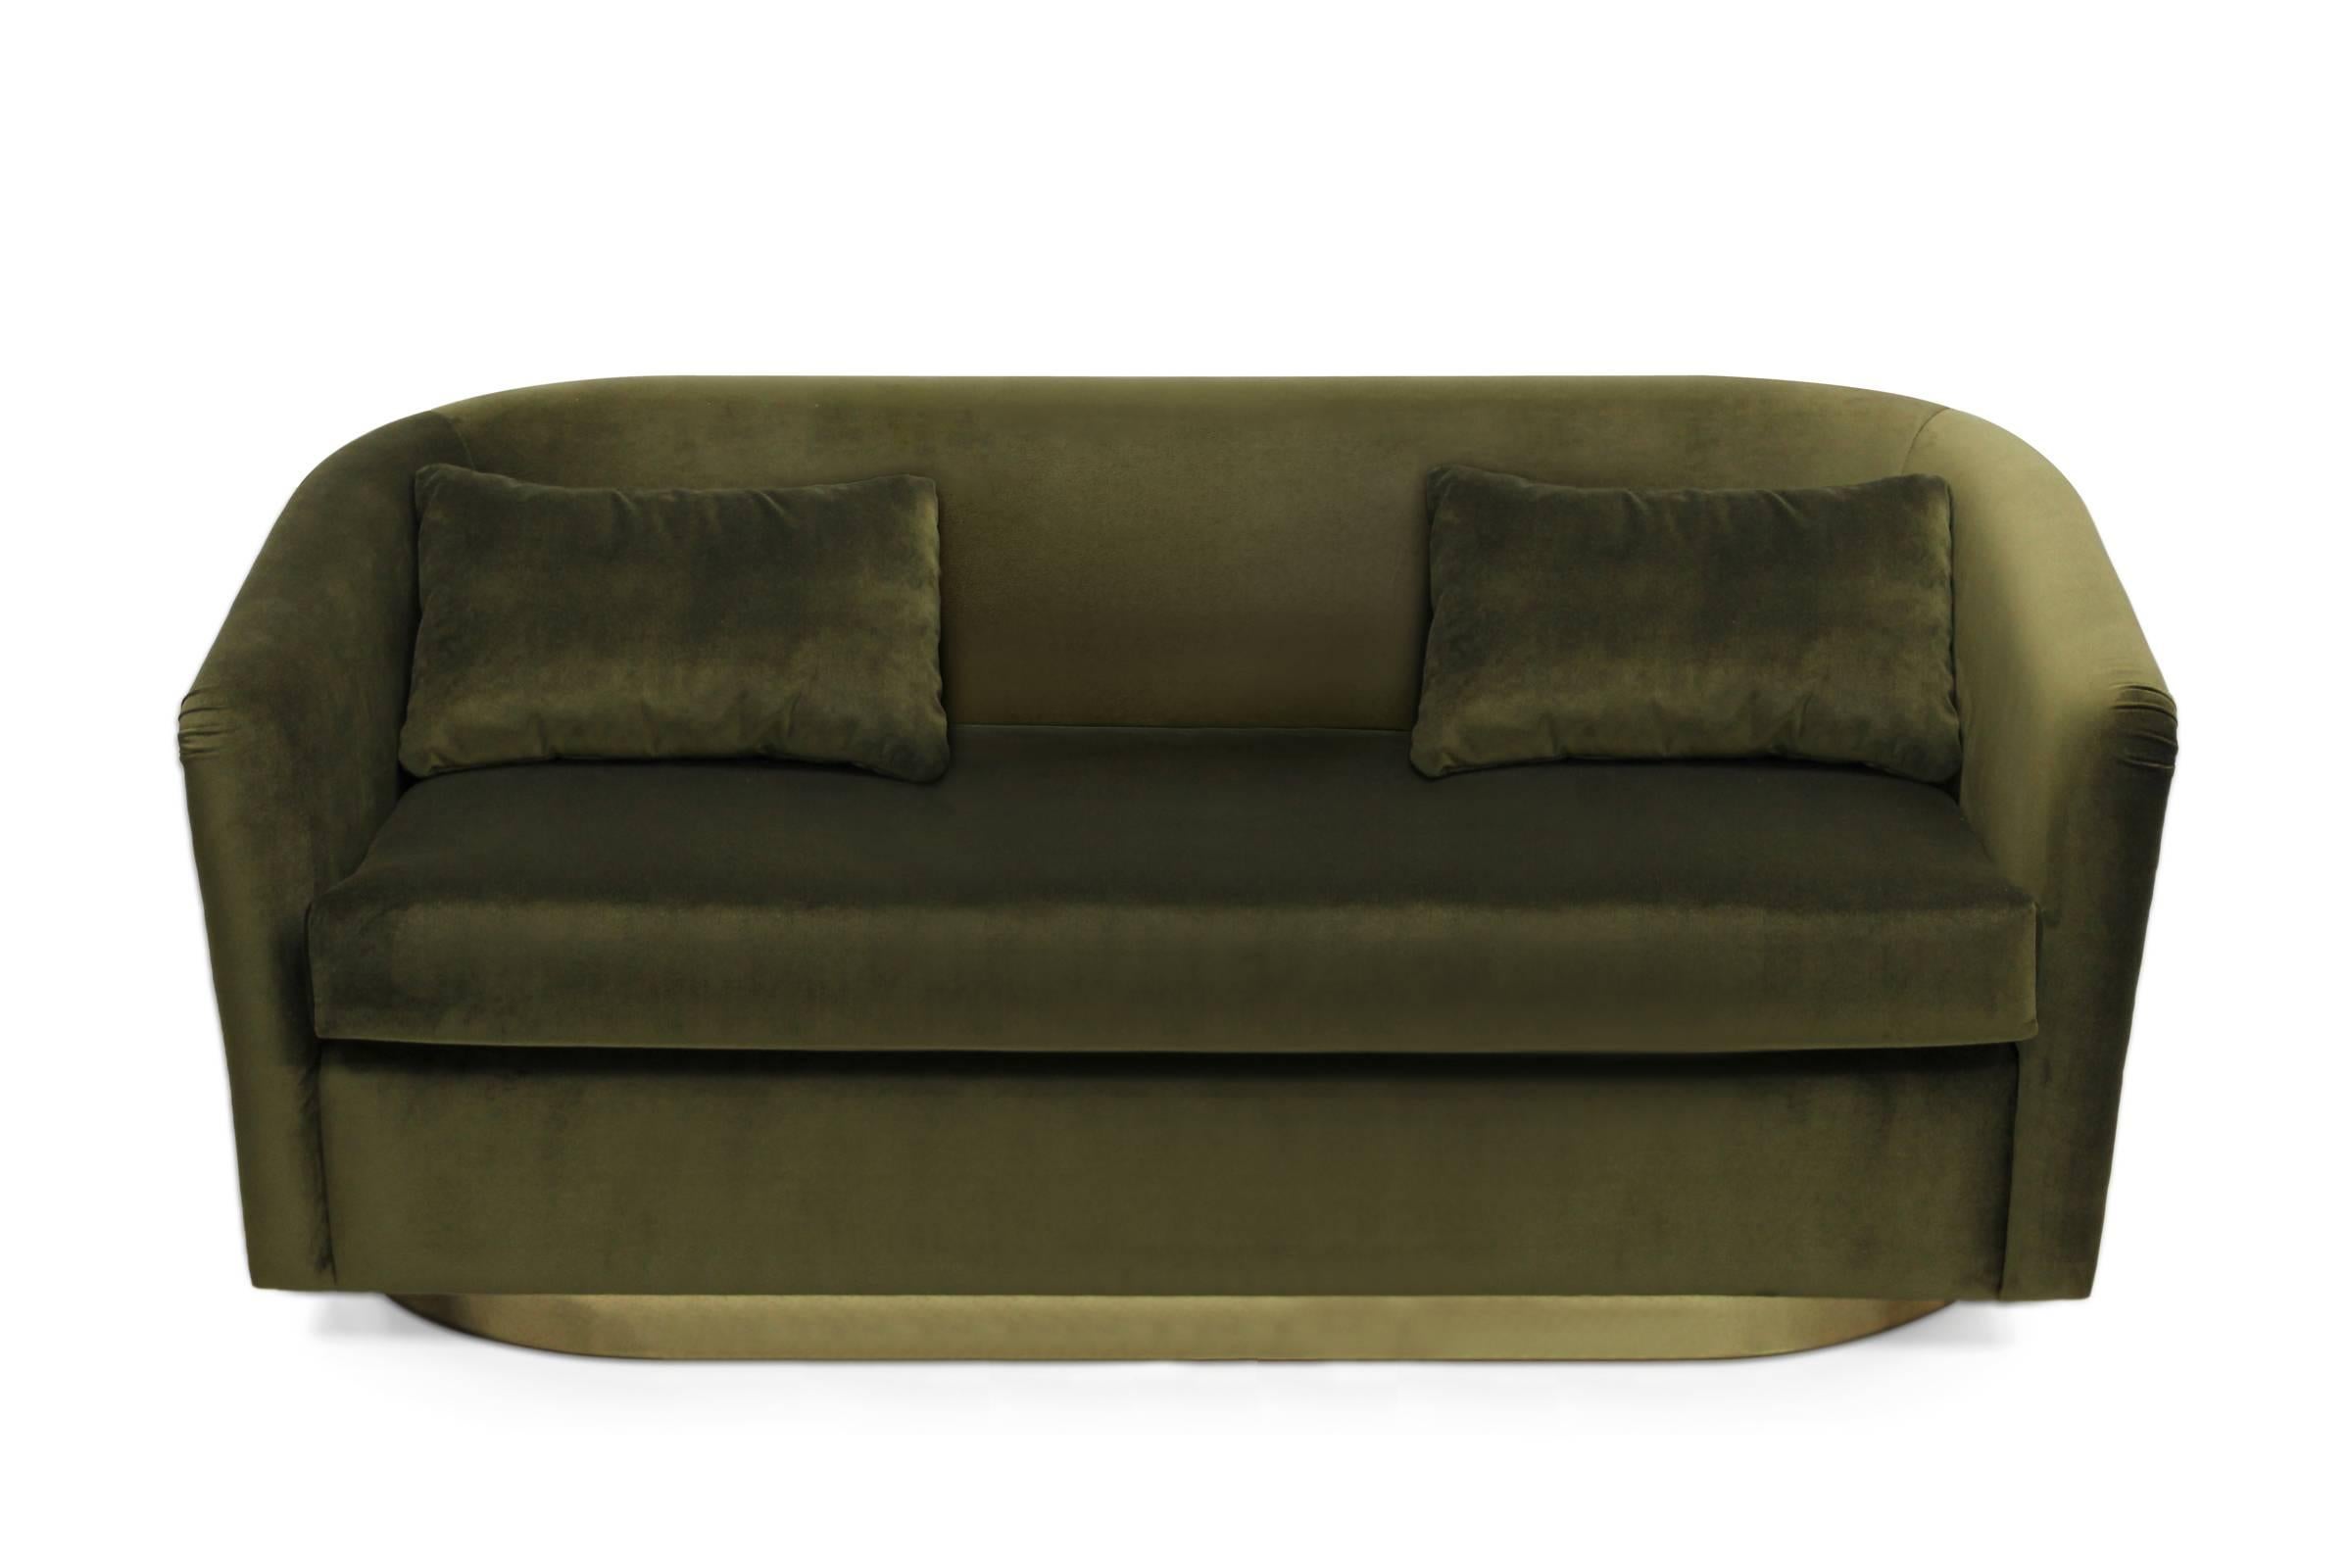 Sofa two seaters natural green in green velvet.
Base and back are in high gloss hammered brass. Nails
are golden polished. 